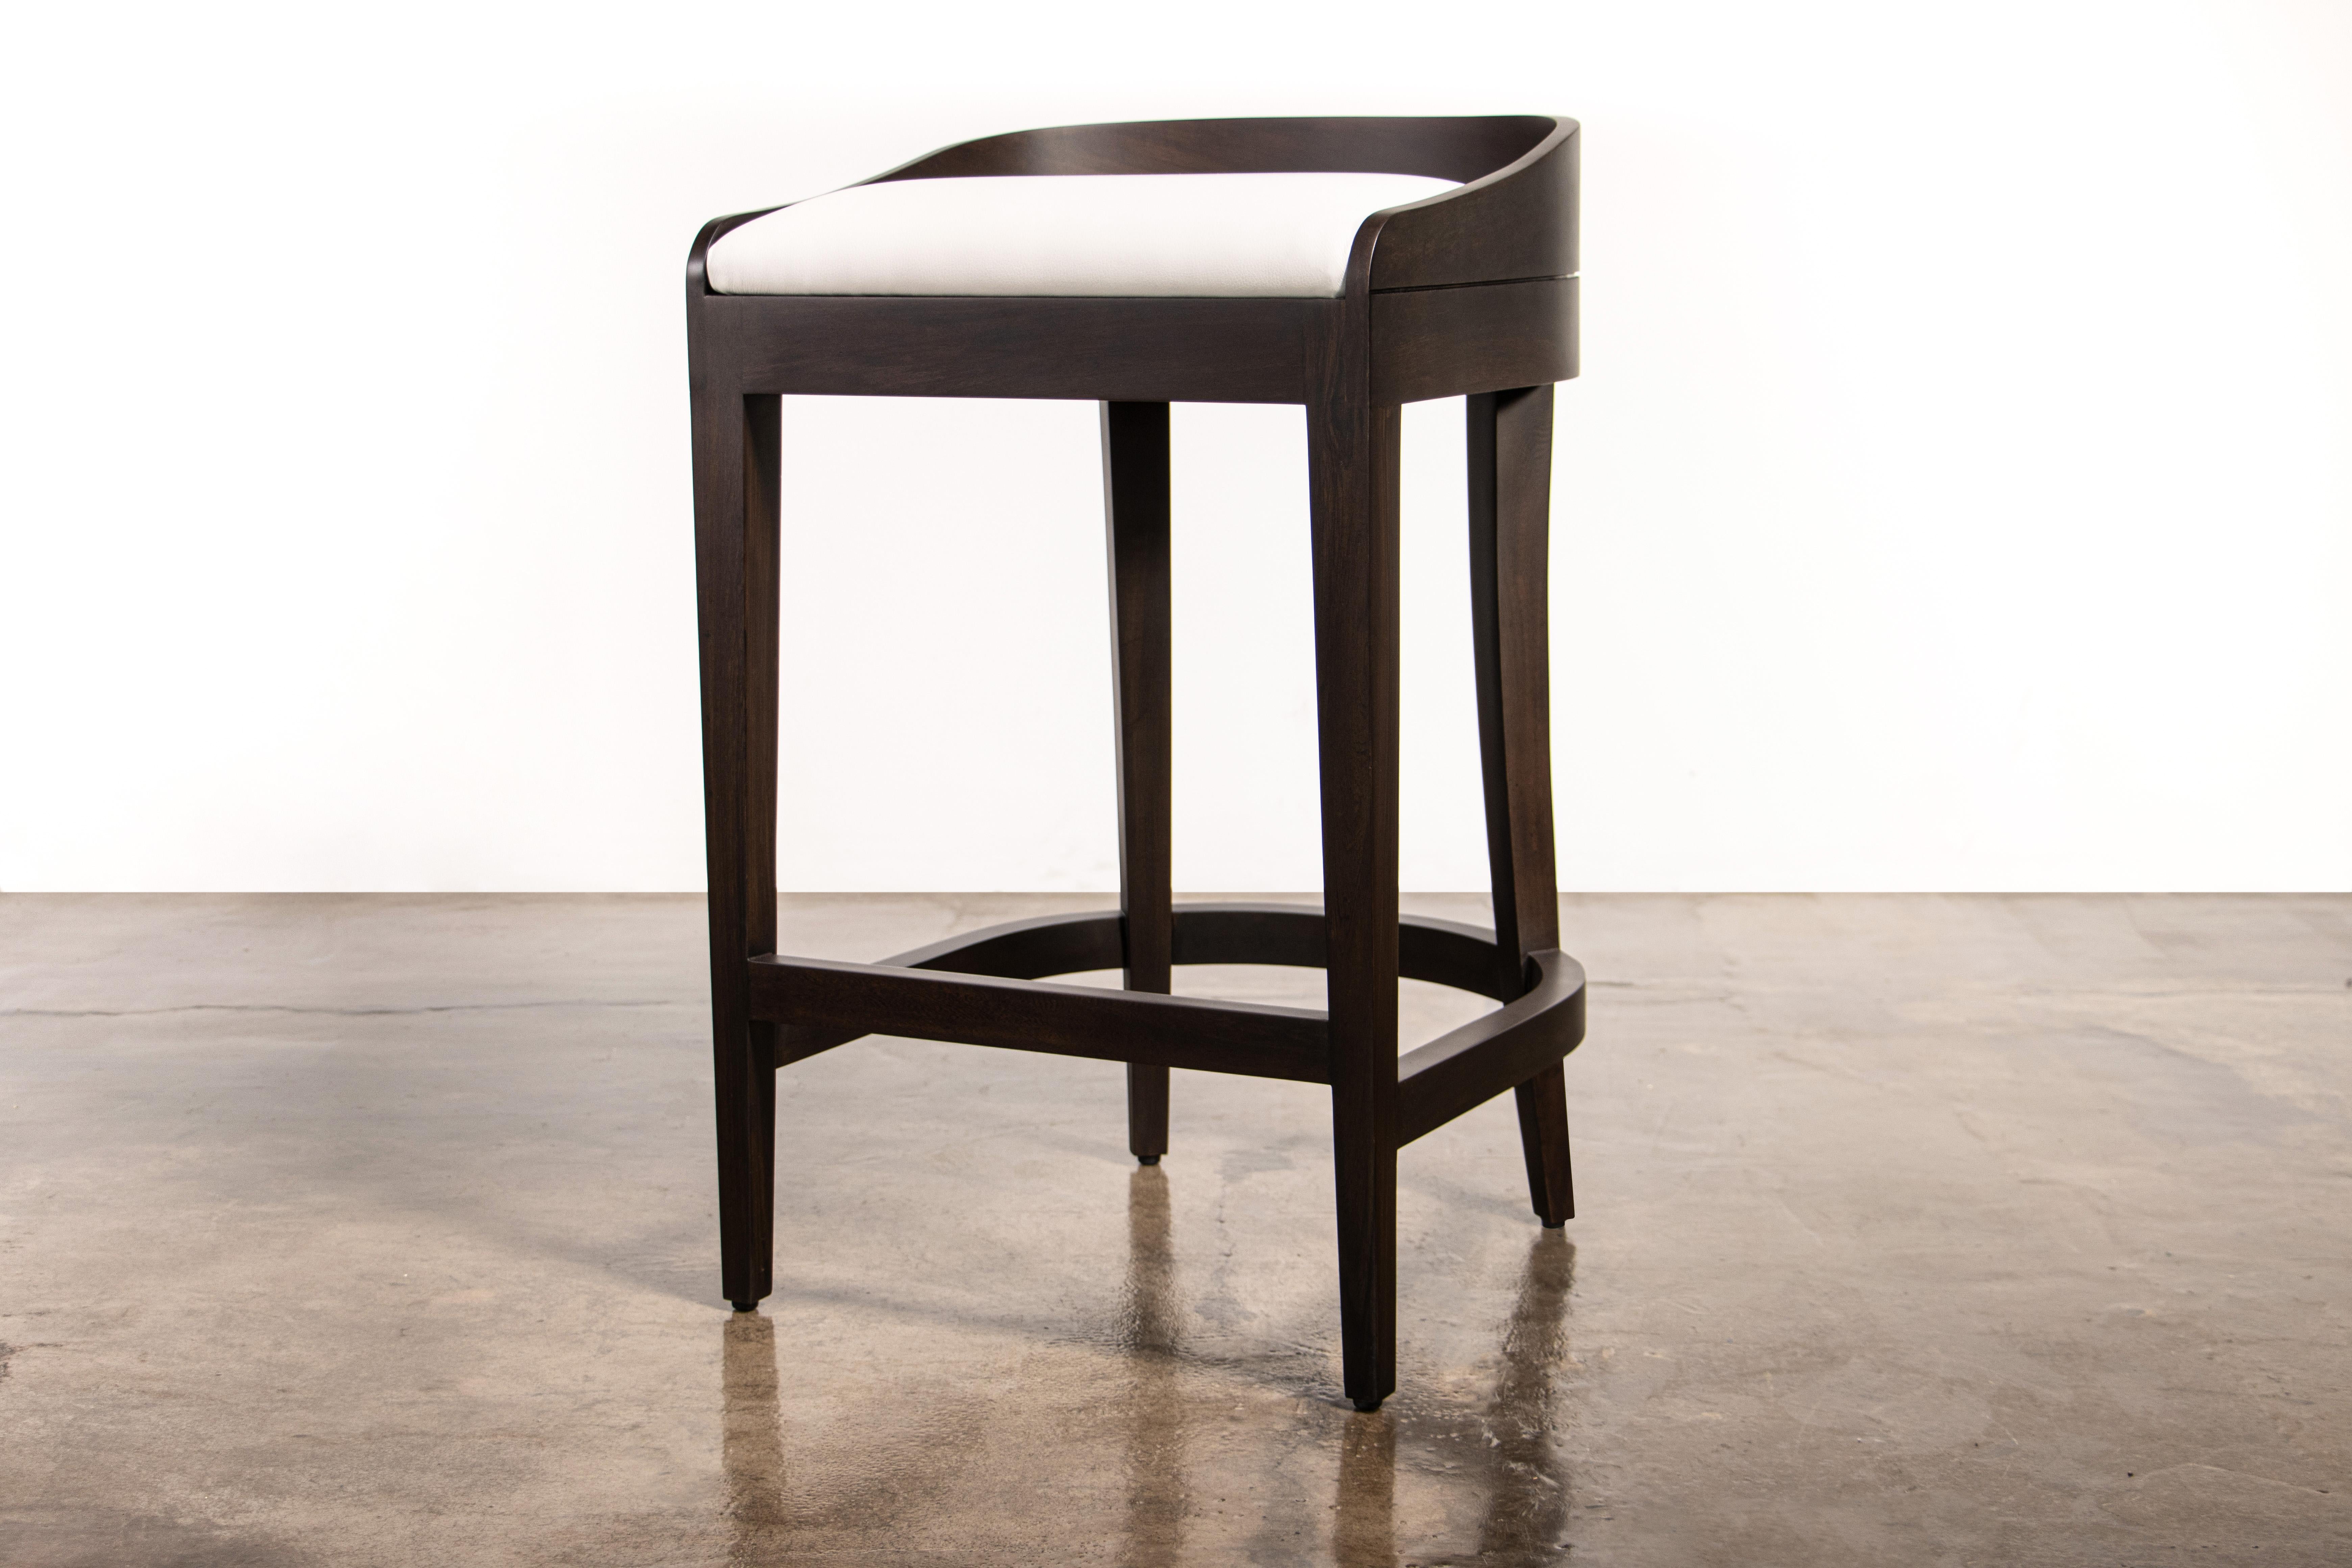 Pia Exotic Contemporary Wood Stool with Wrapped Leather by Costantini

Measurements are 28